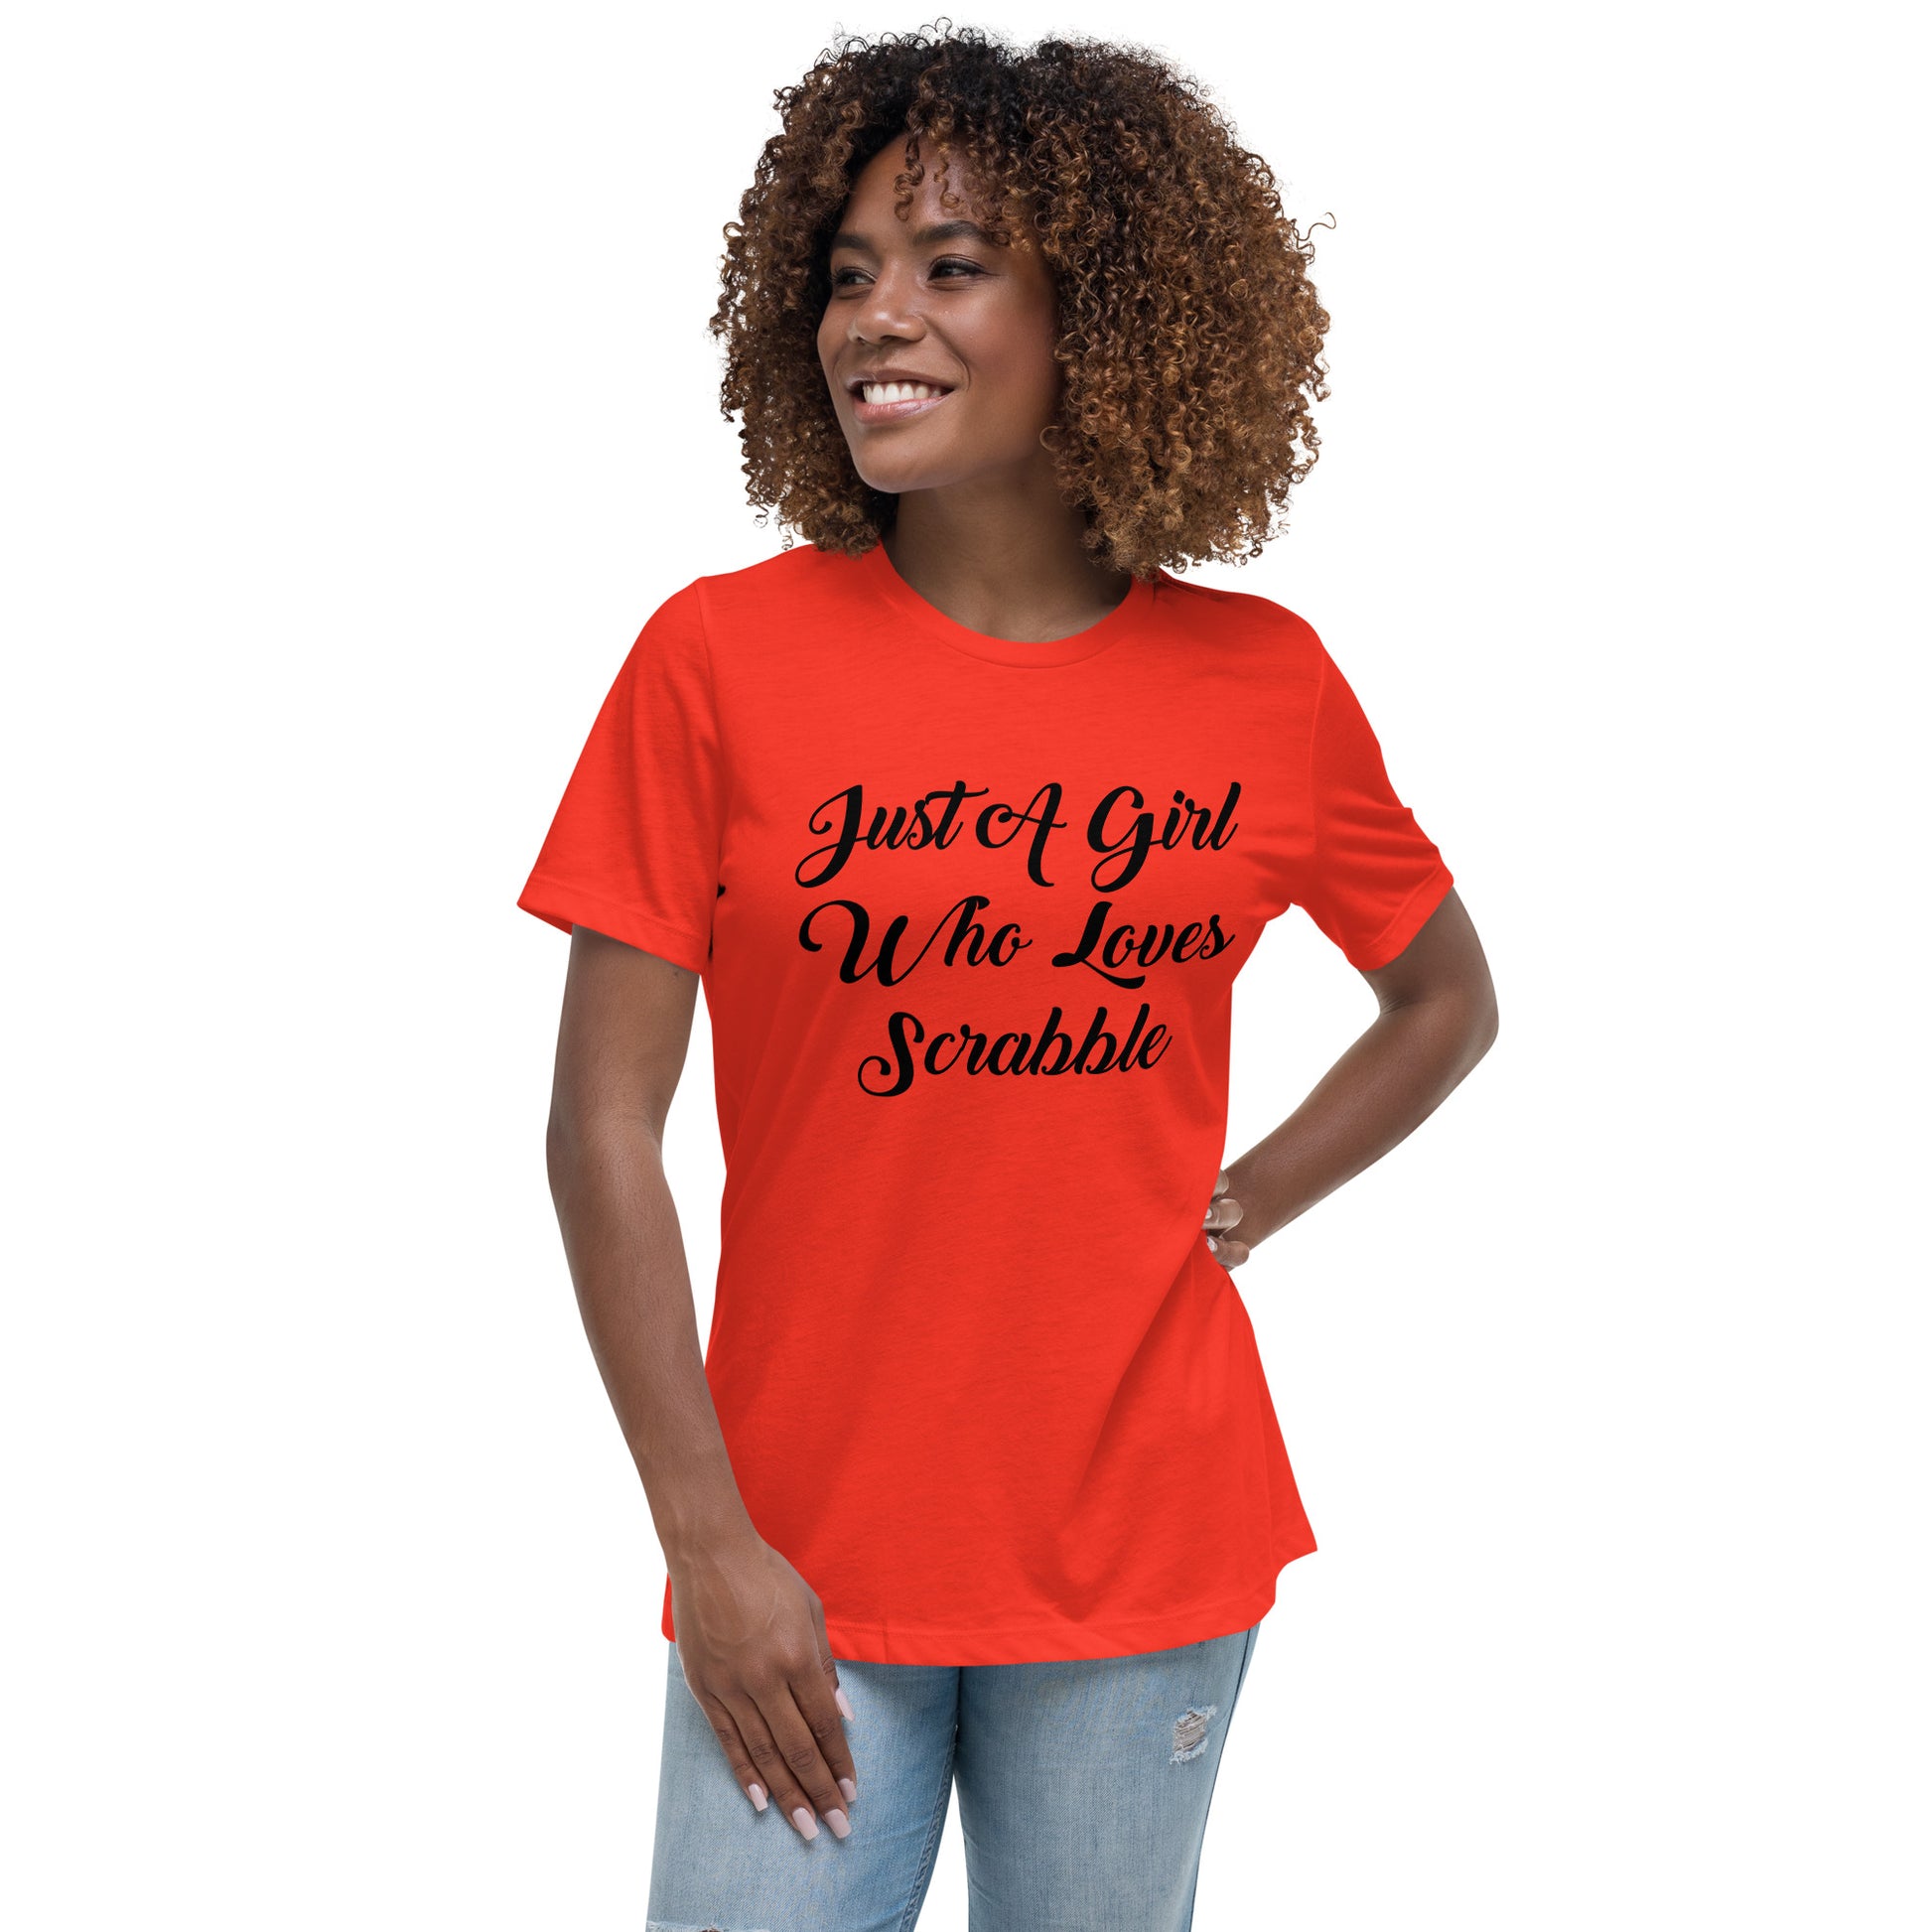 Just a Girl Who Loves Scrabble Women's Relaxed T-Shirt